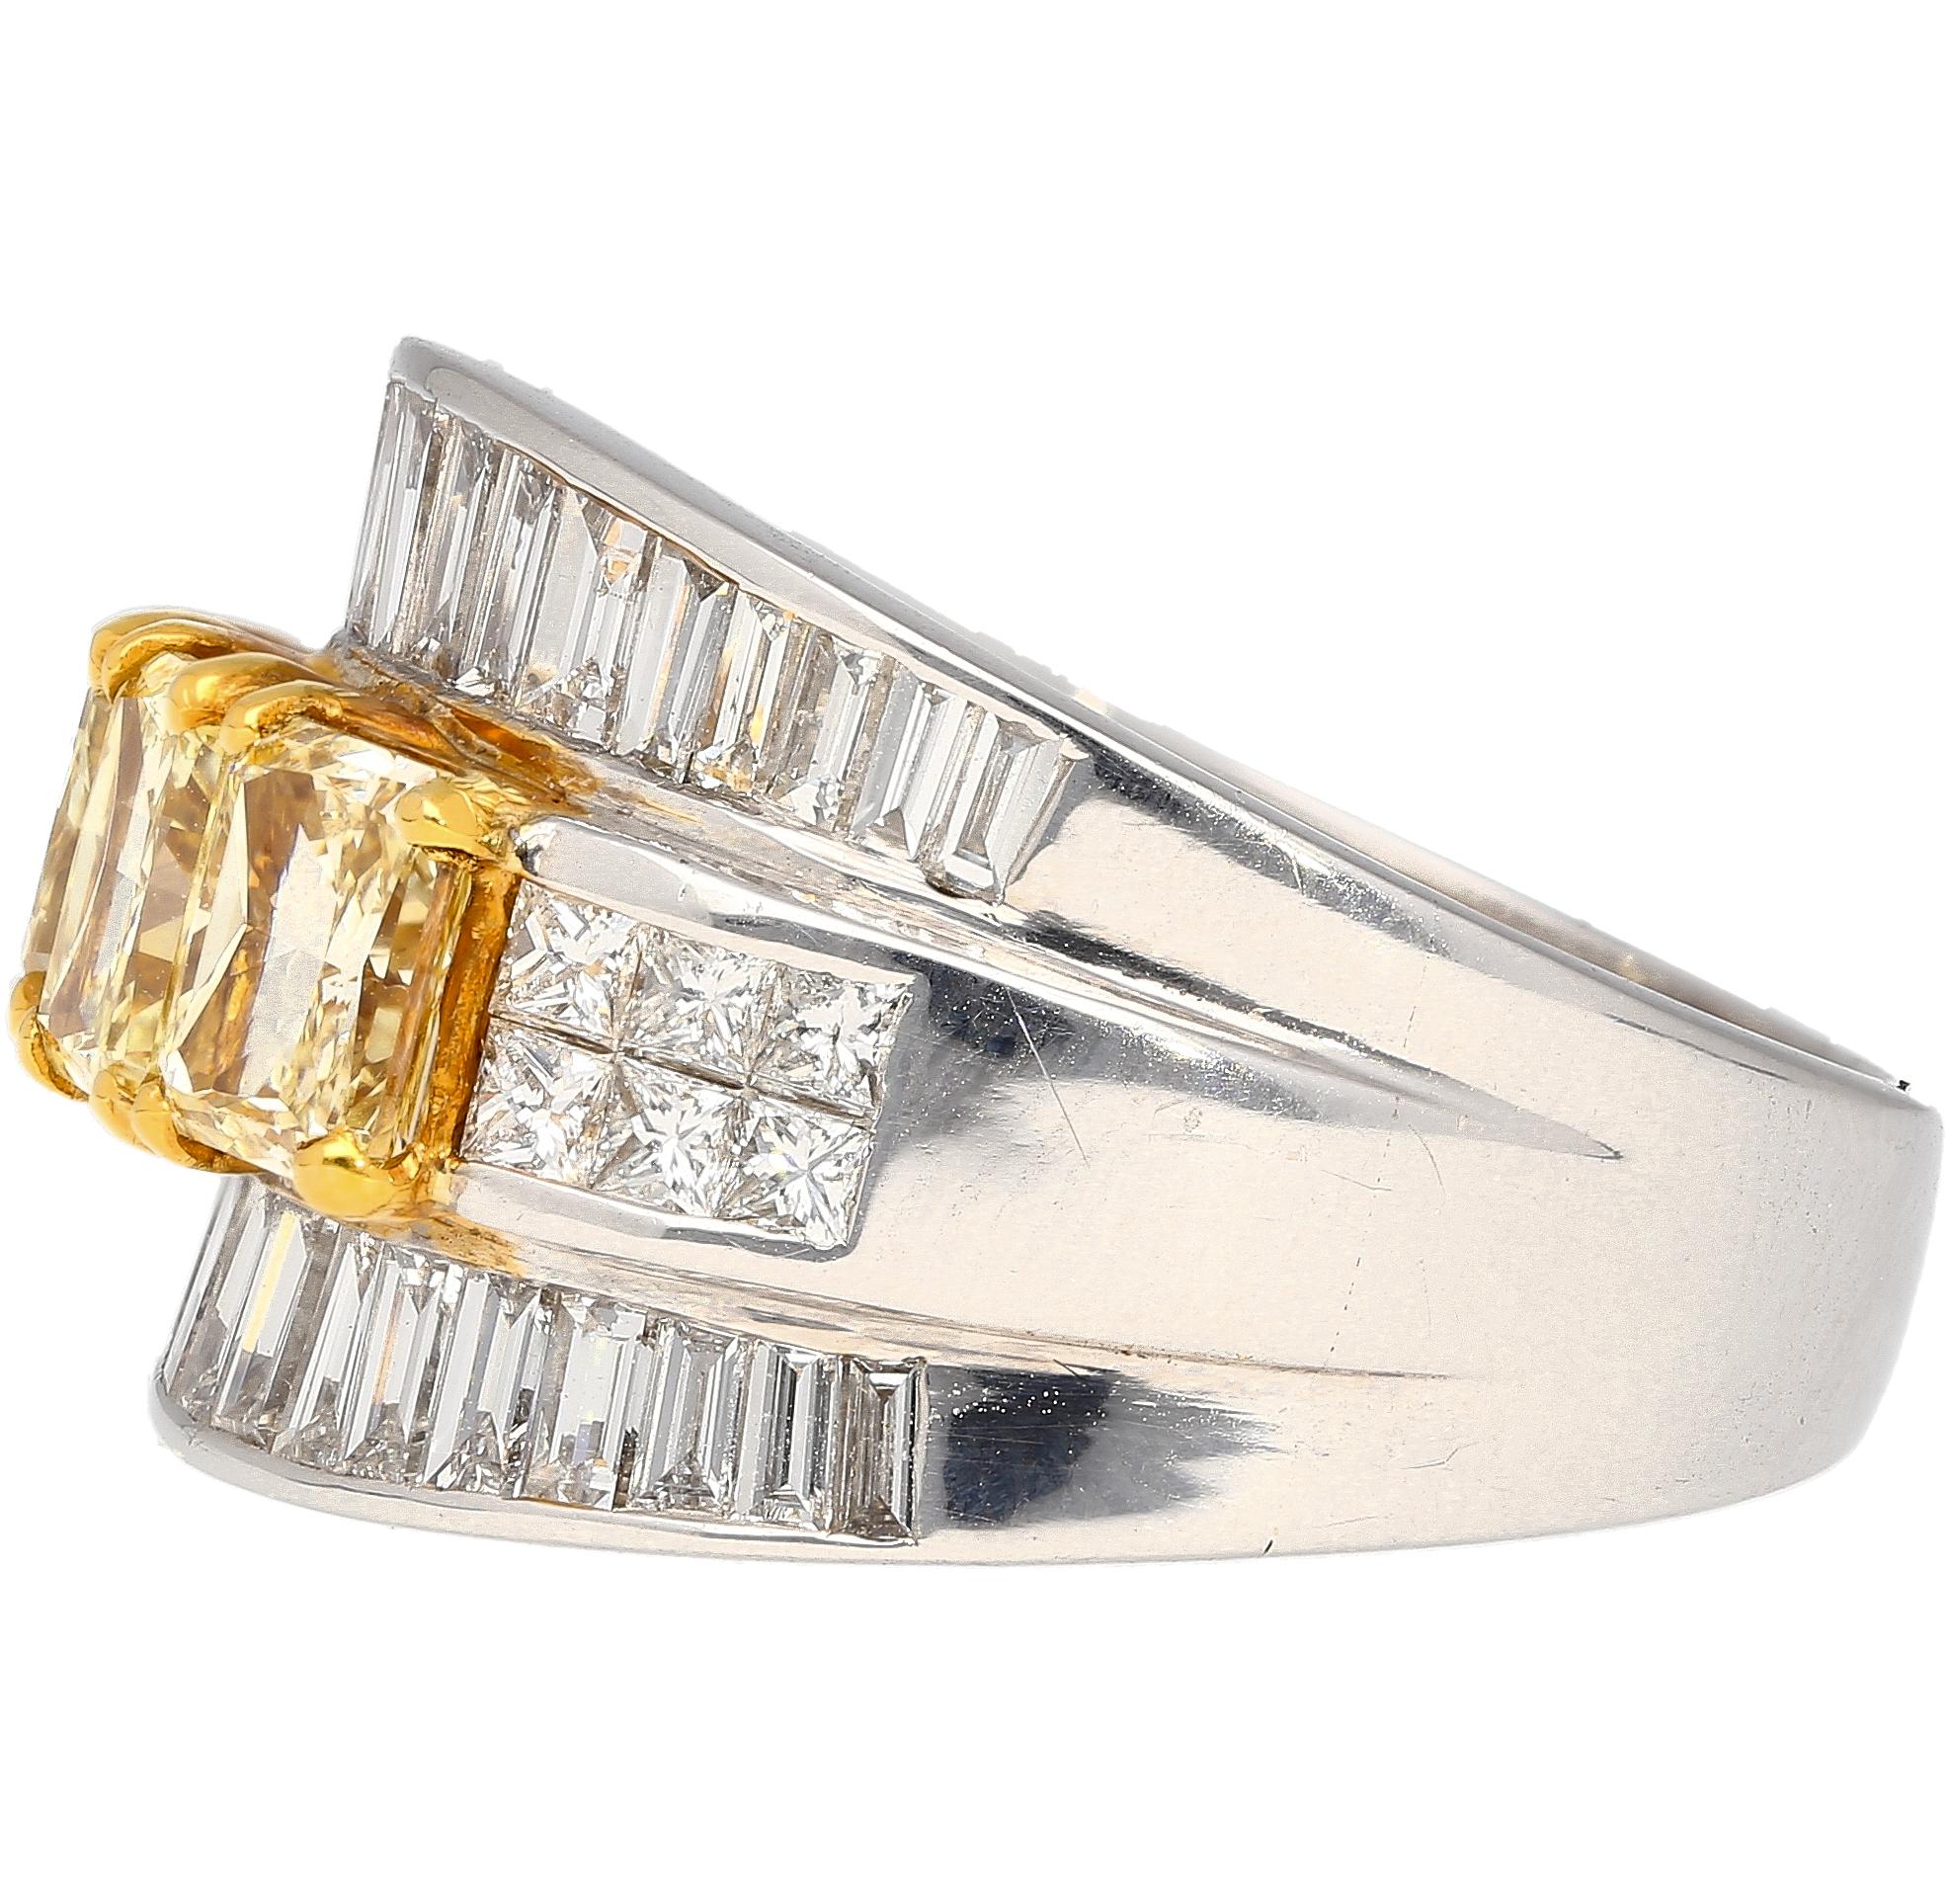 3.28 Carat Radiant Cut Fancy Yellow Diamond 3-Stone Ring in 18k White Gold In New Condition For Sale In Miami, FL